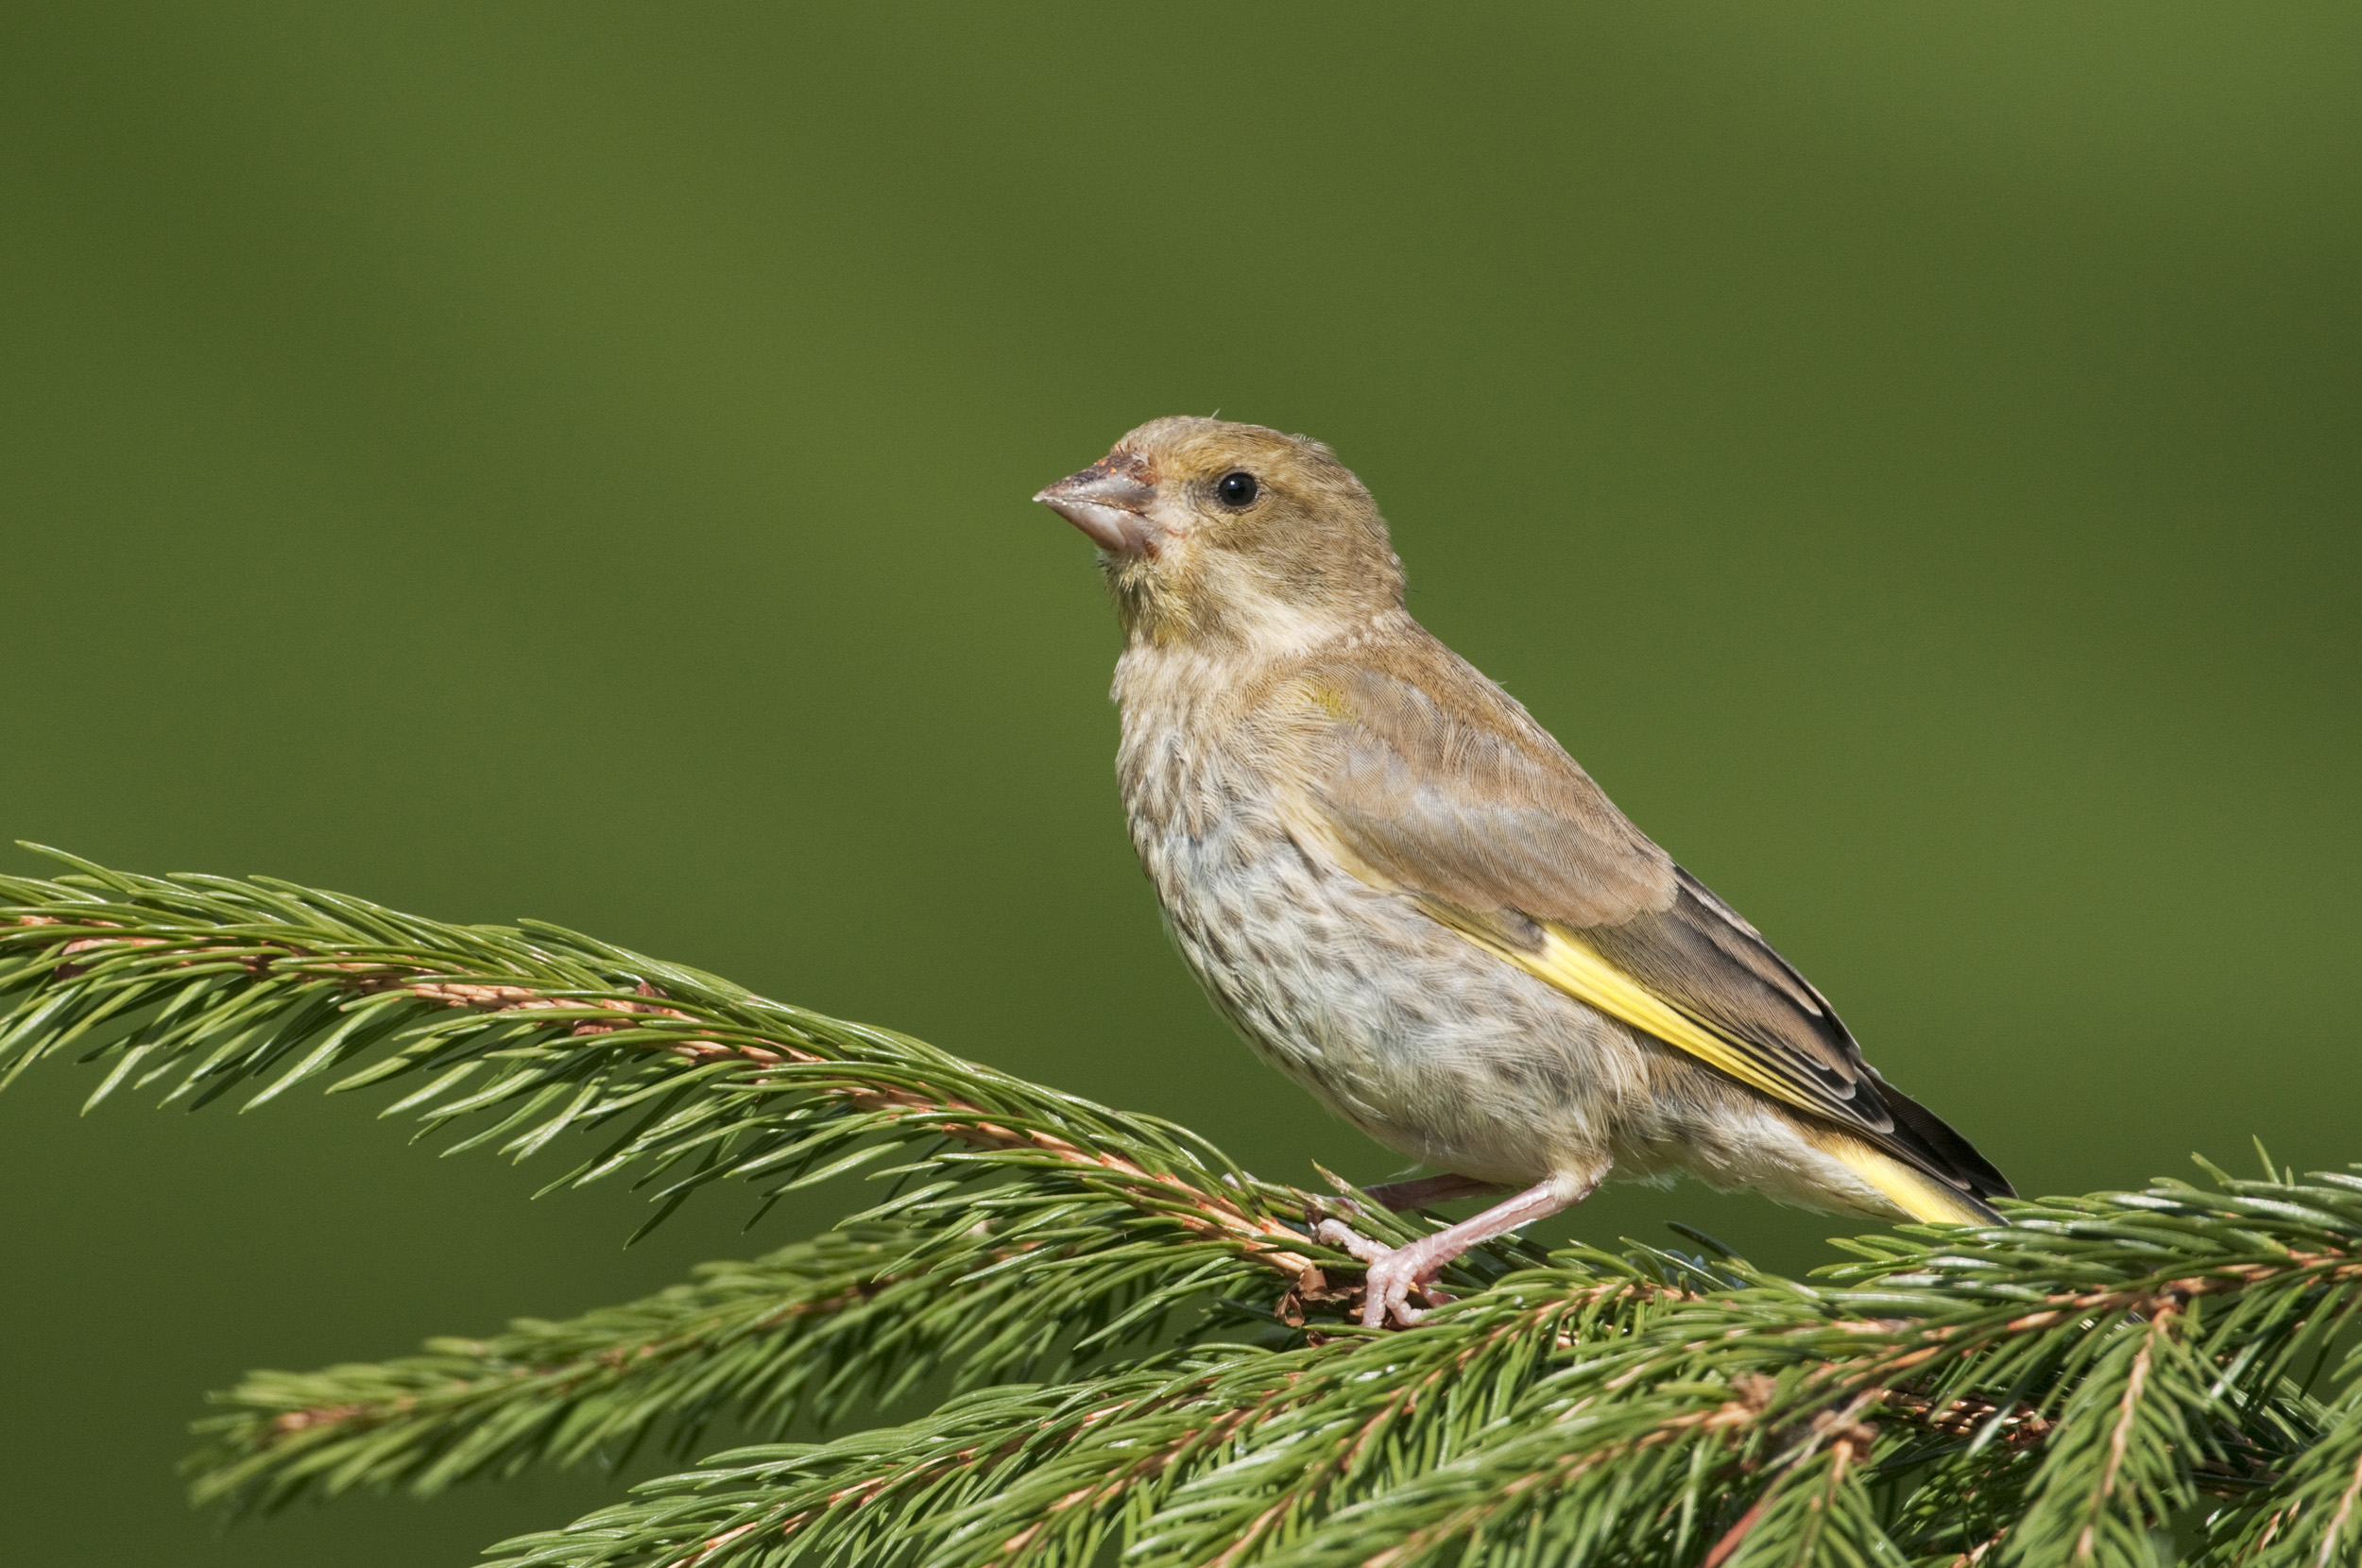 A lone juvenile Greenfinch perched on a conifer branch.